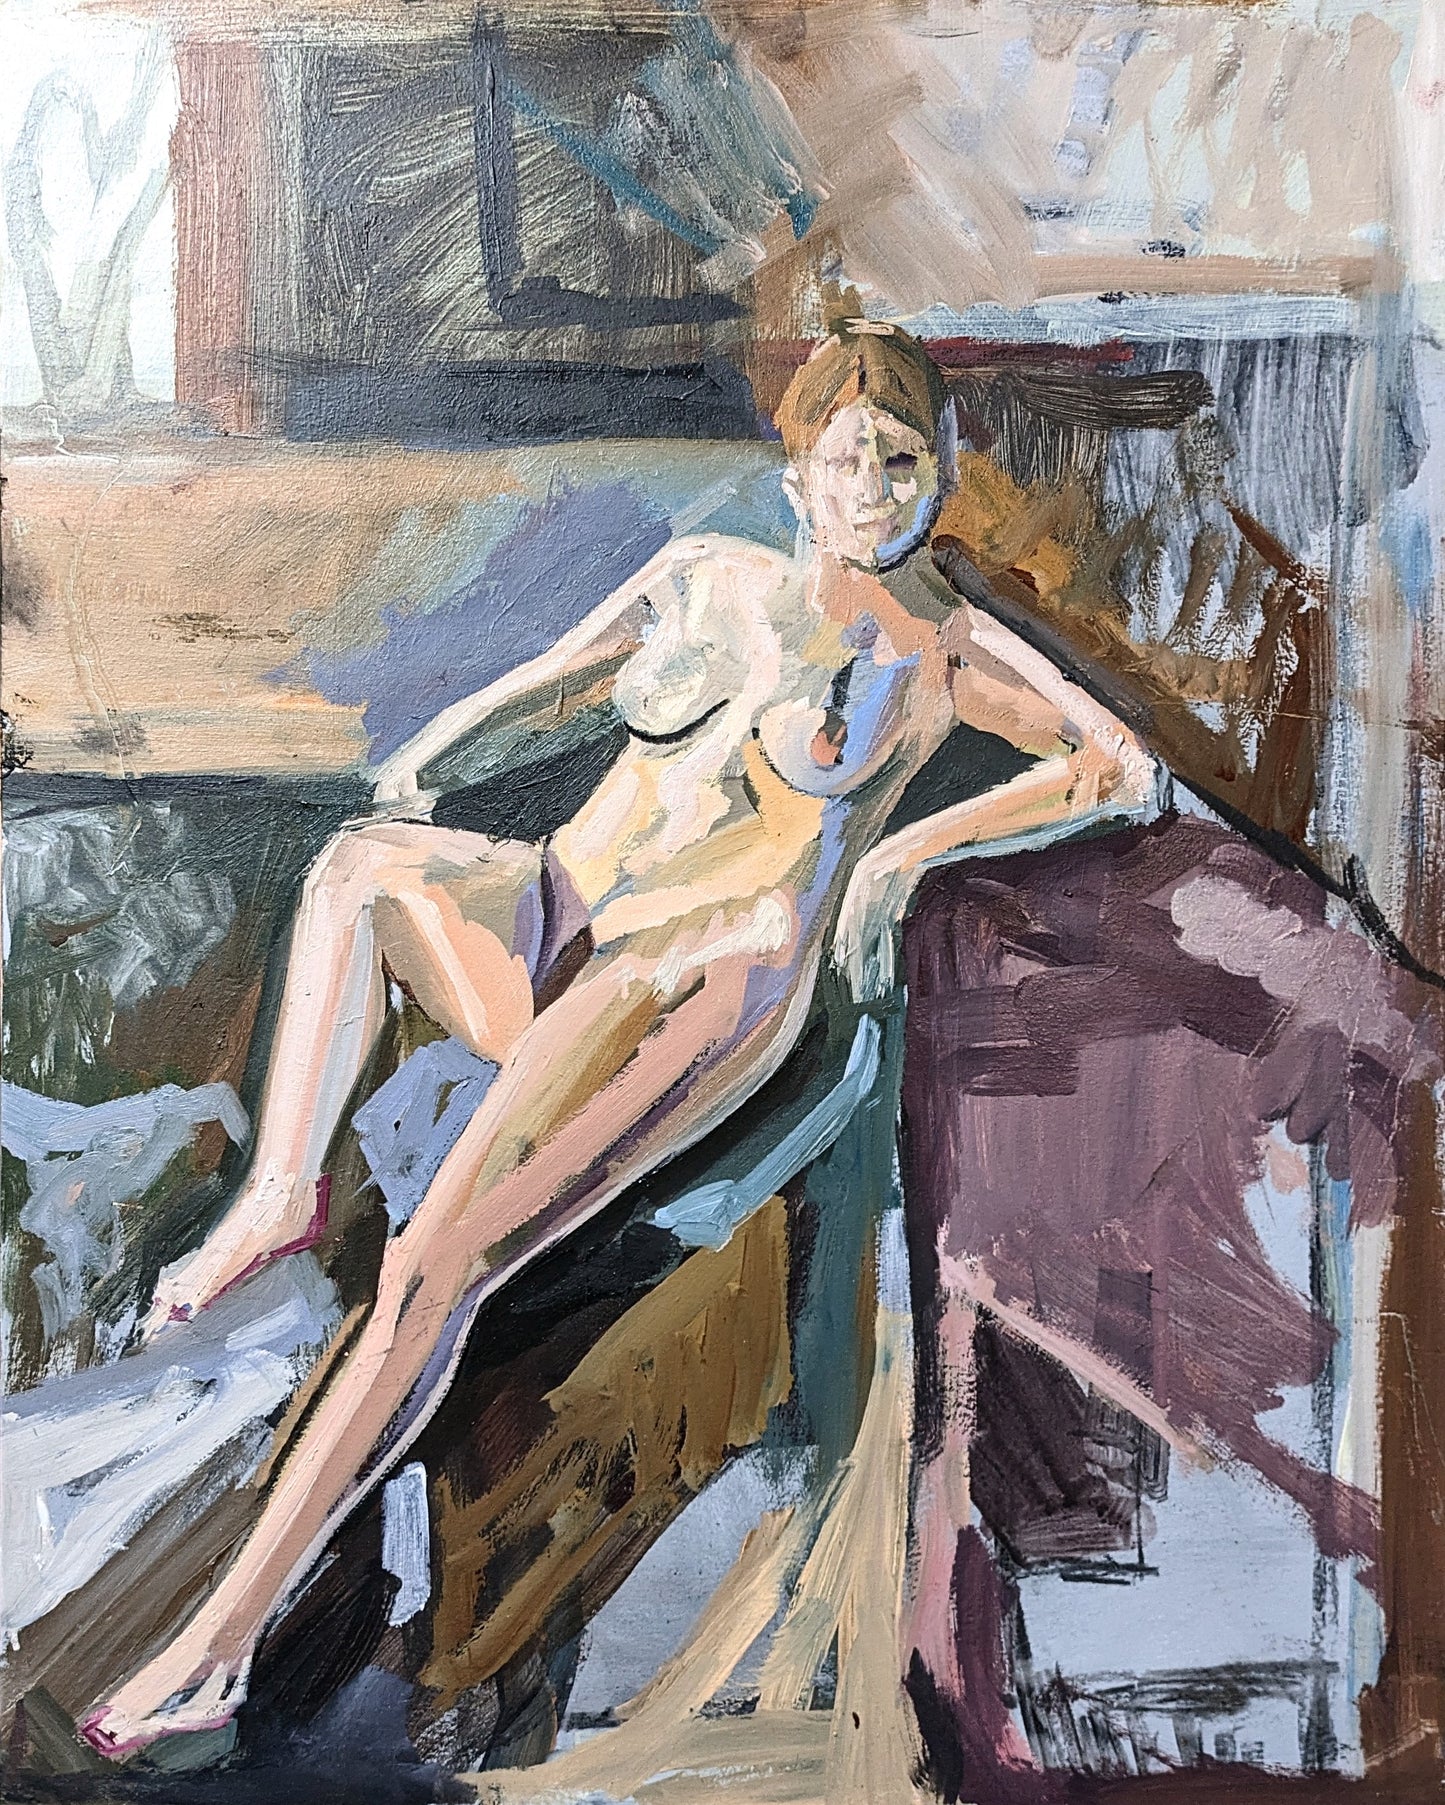 ‘Reclining Nude Confronting the Viewer’ by Melissa Clements